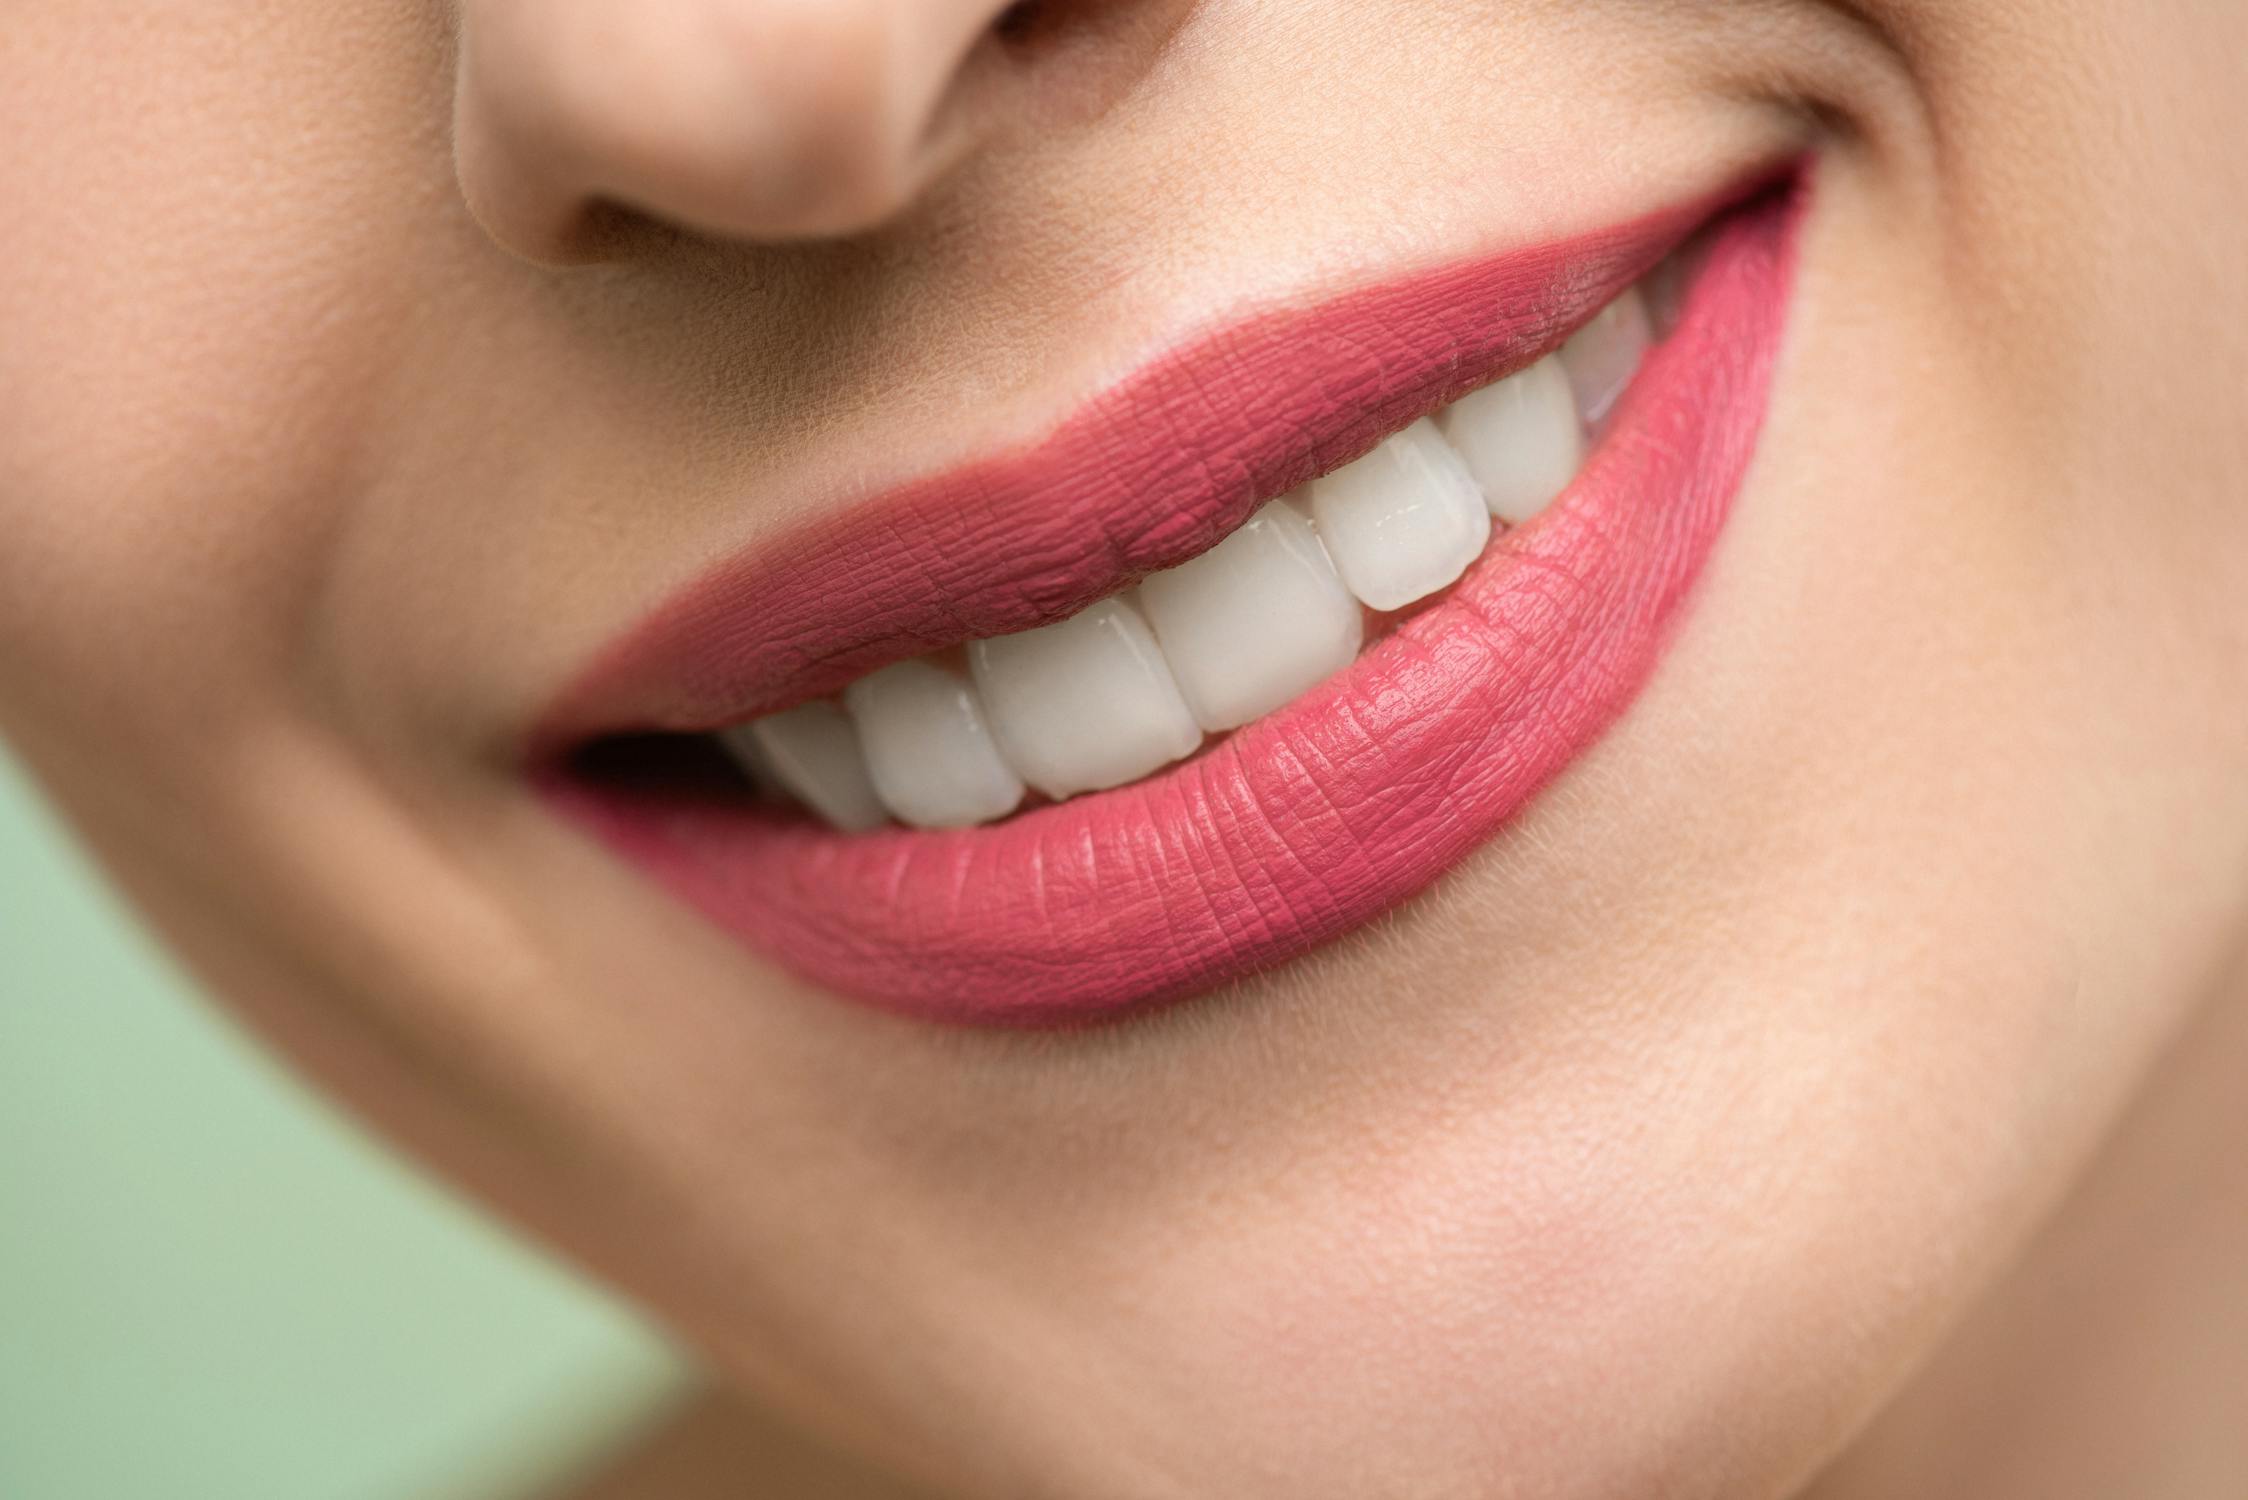 Beautiful Smile Photo by Shiny Diamond from Pexels: https://www.pexels.com/photo/woman-with-red-lipstick-smiling-3762453/